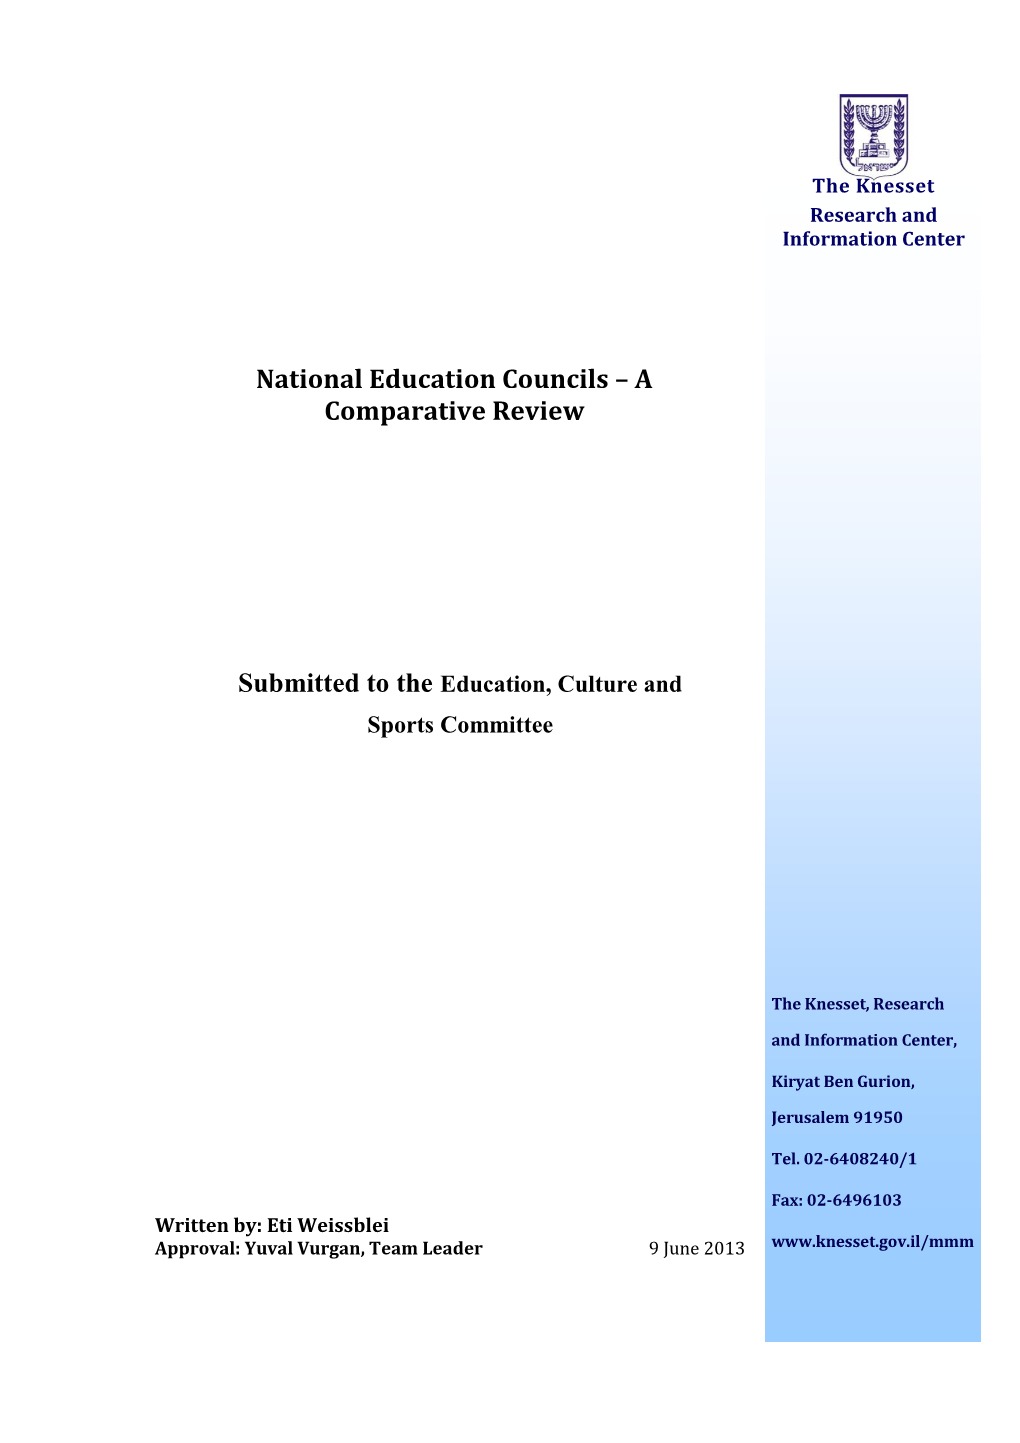 National Education Councils – a Comparative Review